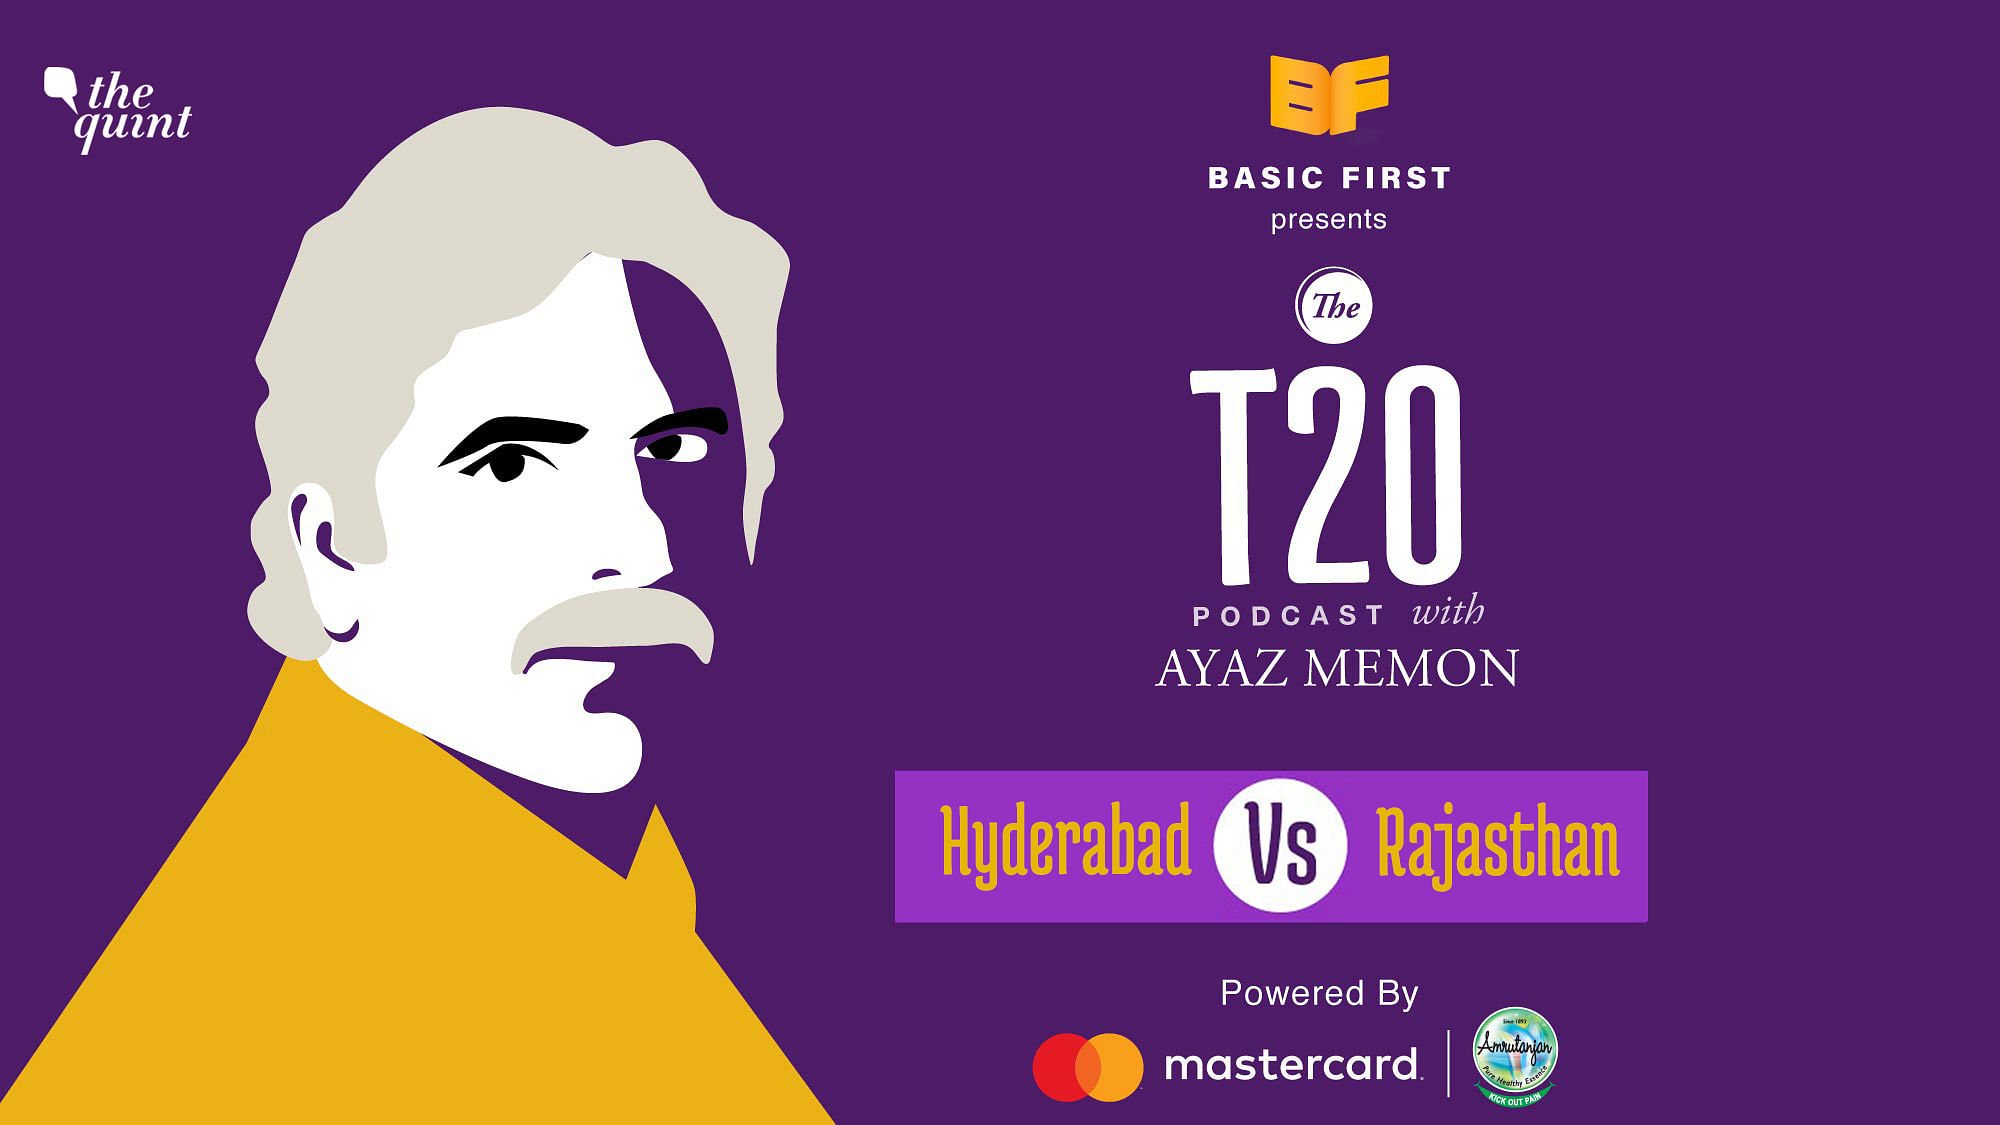 On episode 26 of The T20 Podcast, Ayaz Memon discusses Rajasthan’s come-from-behind win over Hyderabad.